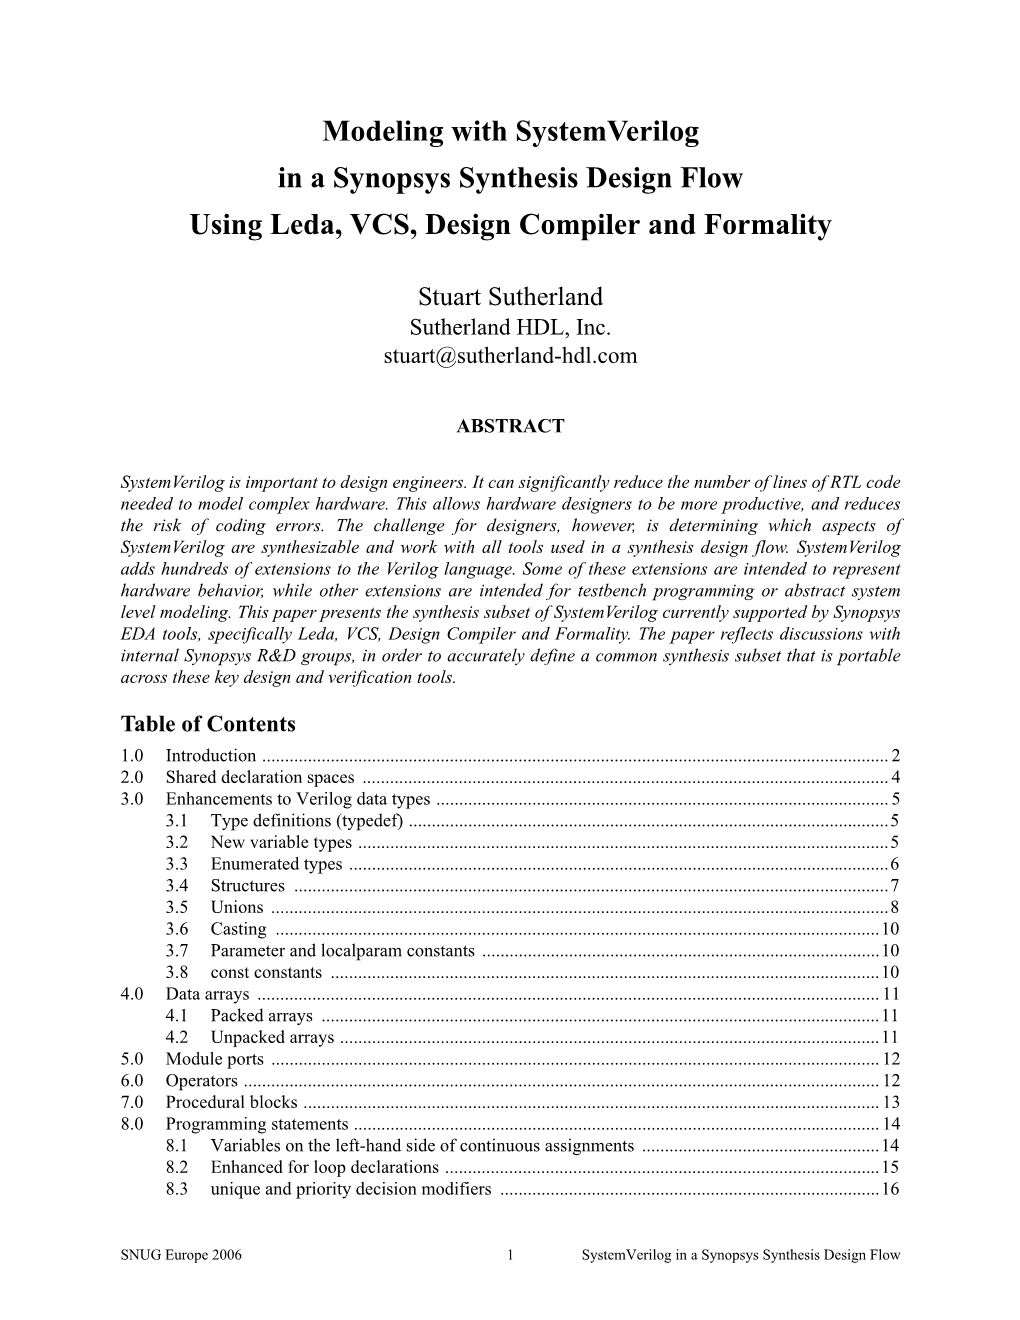 Modeling with Systemverilog in a Synopsys Synthesis Design Flow Using Leda, VCS, Design Compiler and Formality